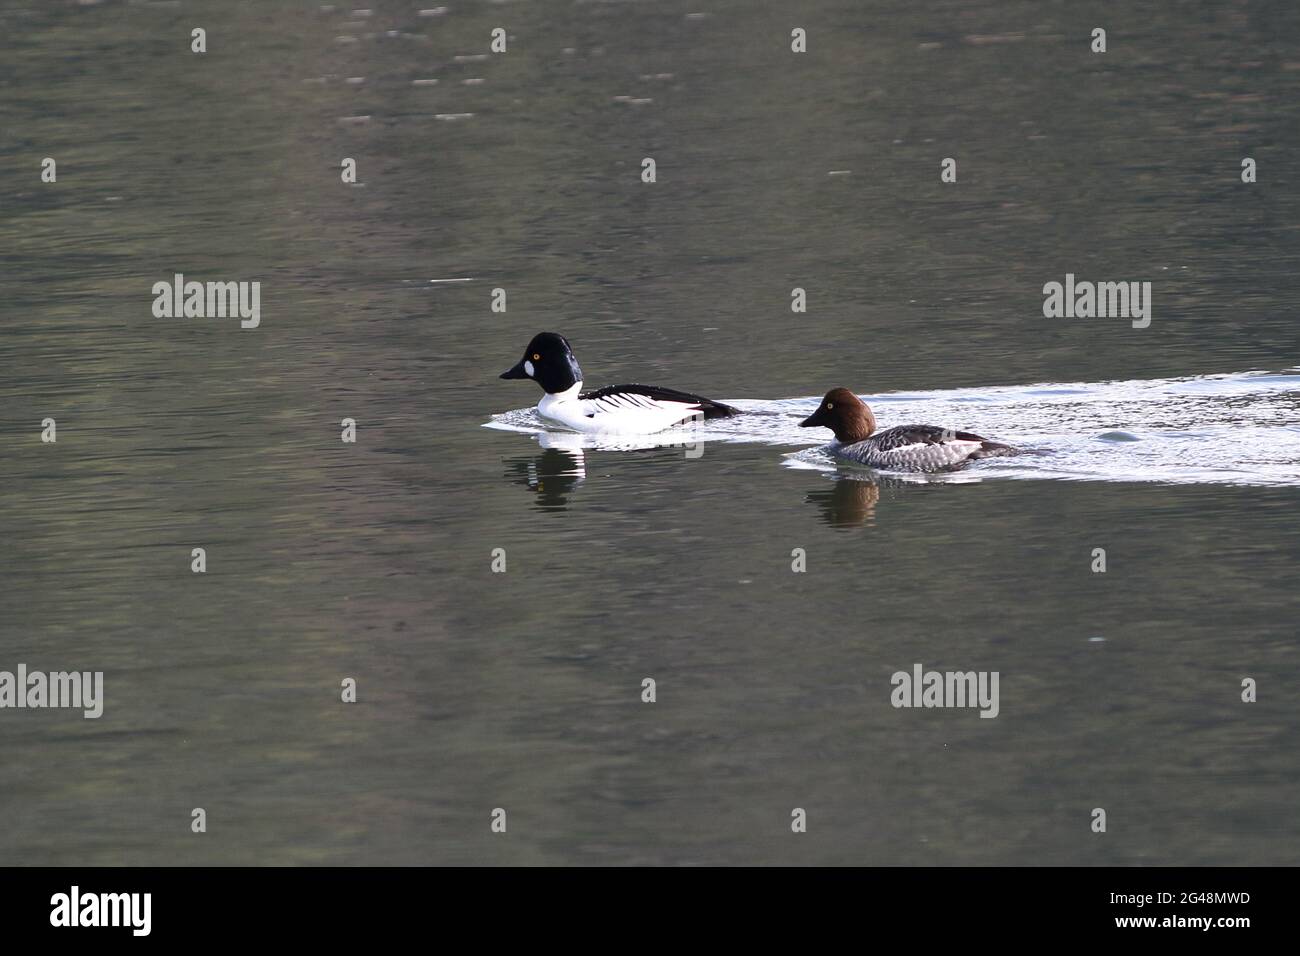 A mated pair of Common Goldeneye Ducks create a small wake and reflections as they swim in calm waters. Stock Photo